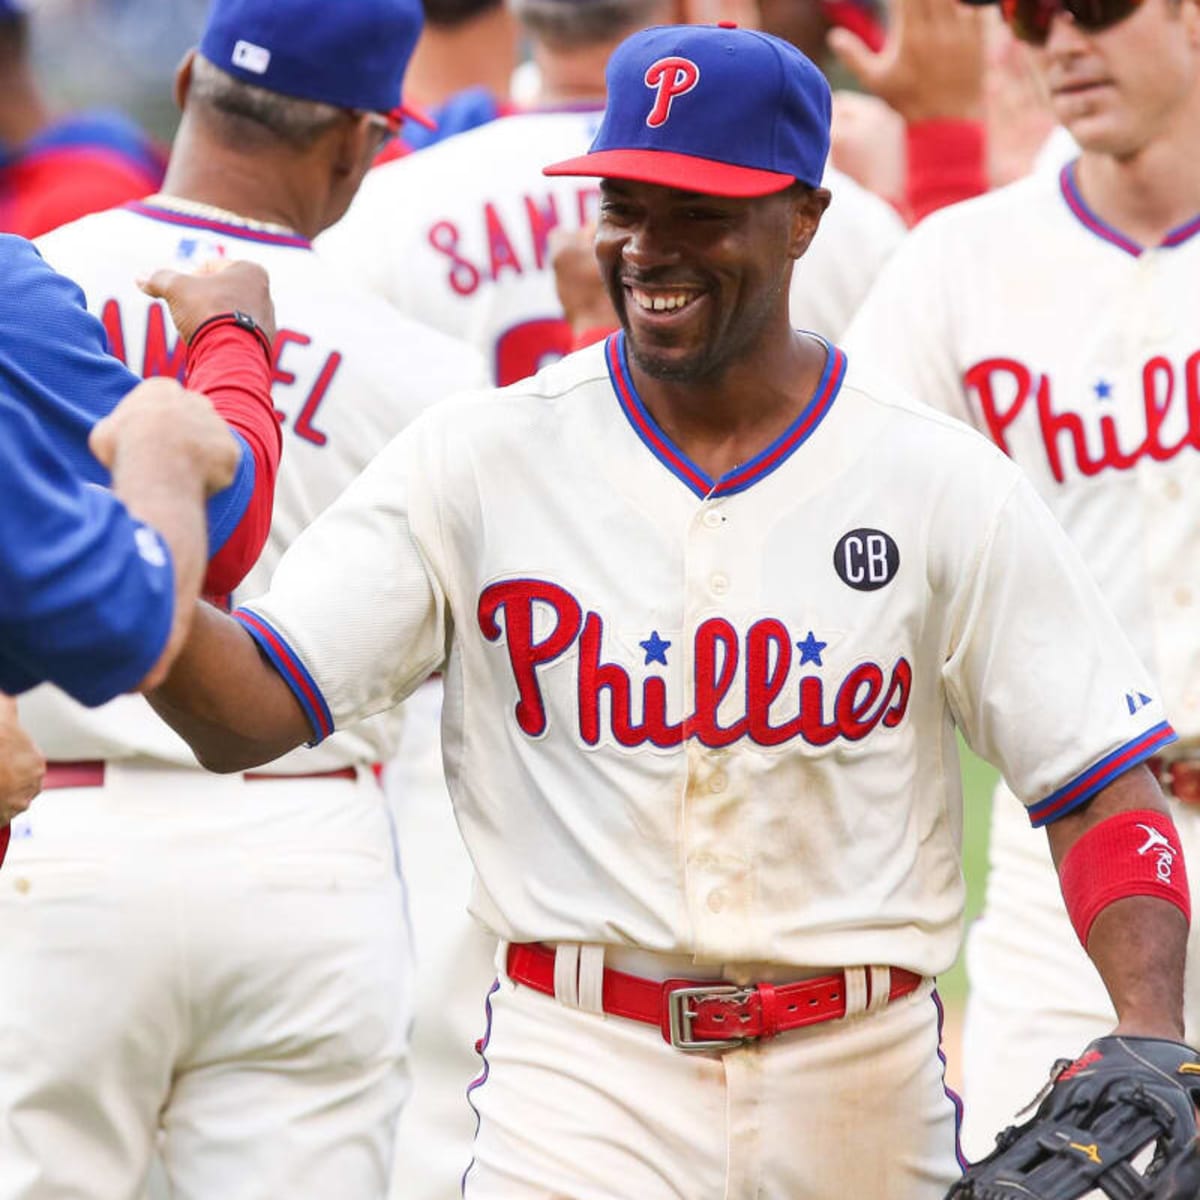 Celebrate Red October with Phillies' Legend Jimmy Rollins This Weekend